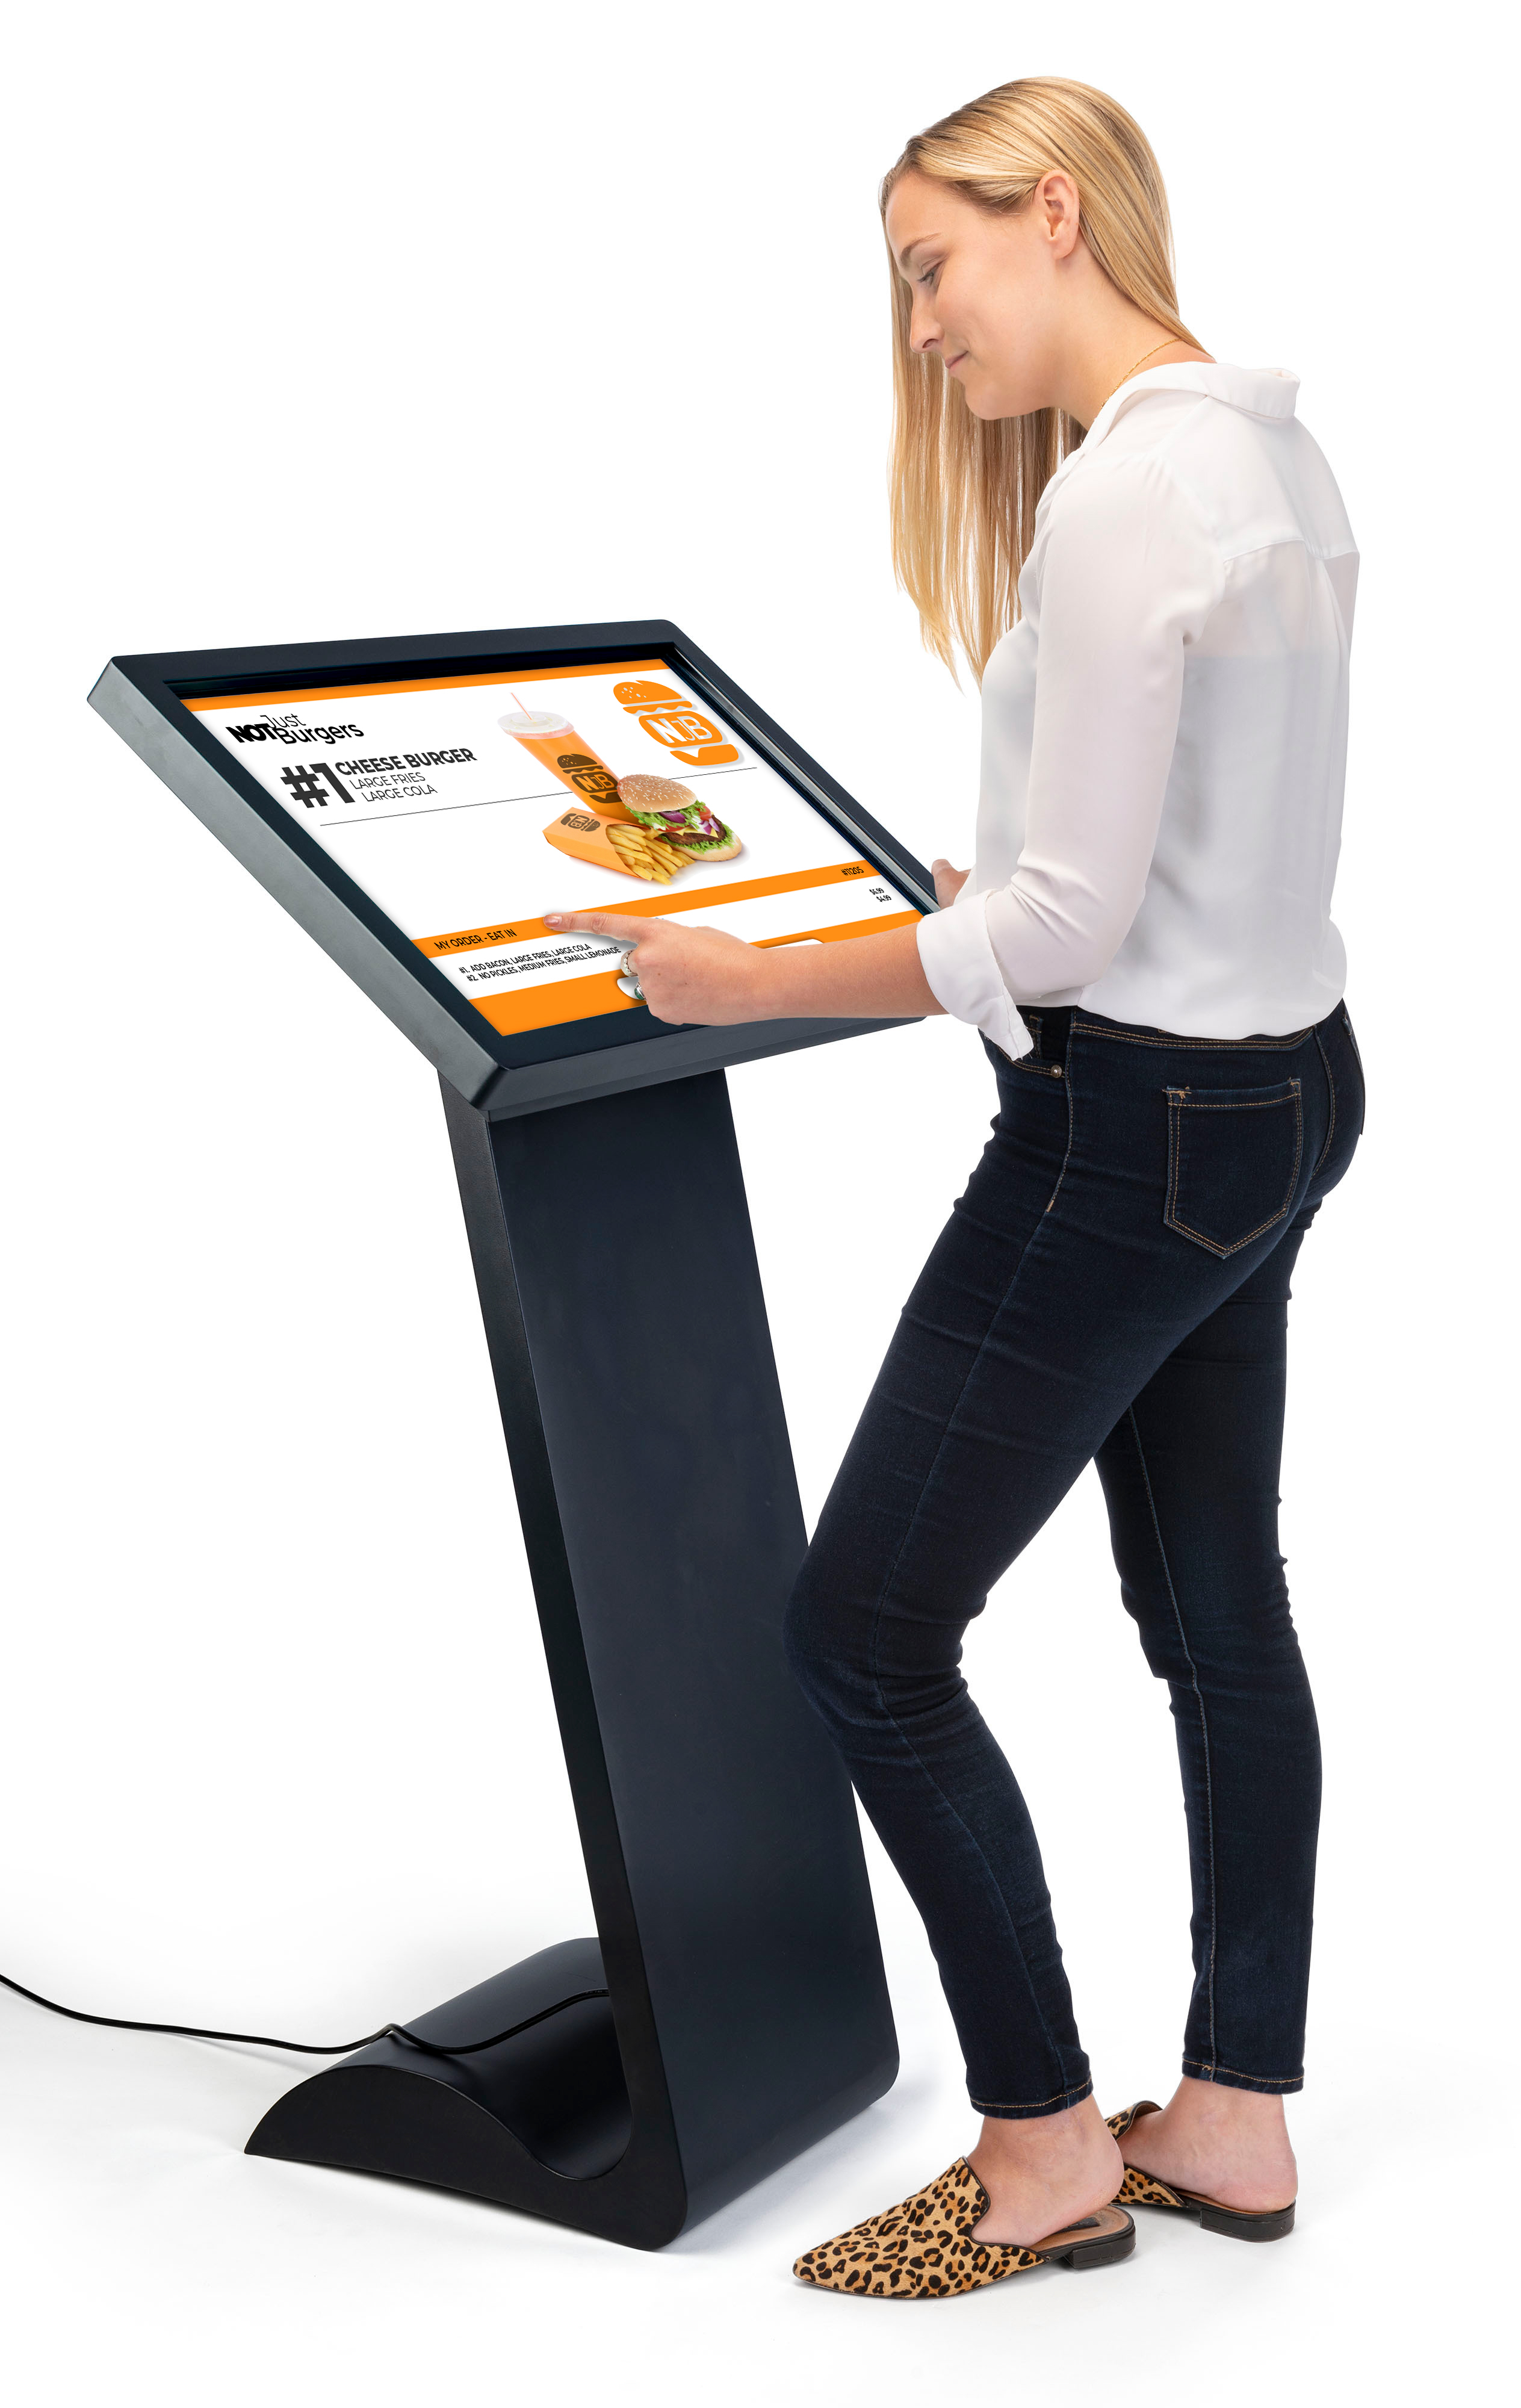 Android-based electronic touchscreen floor display kiosk directory